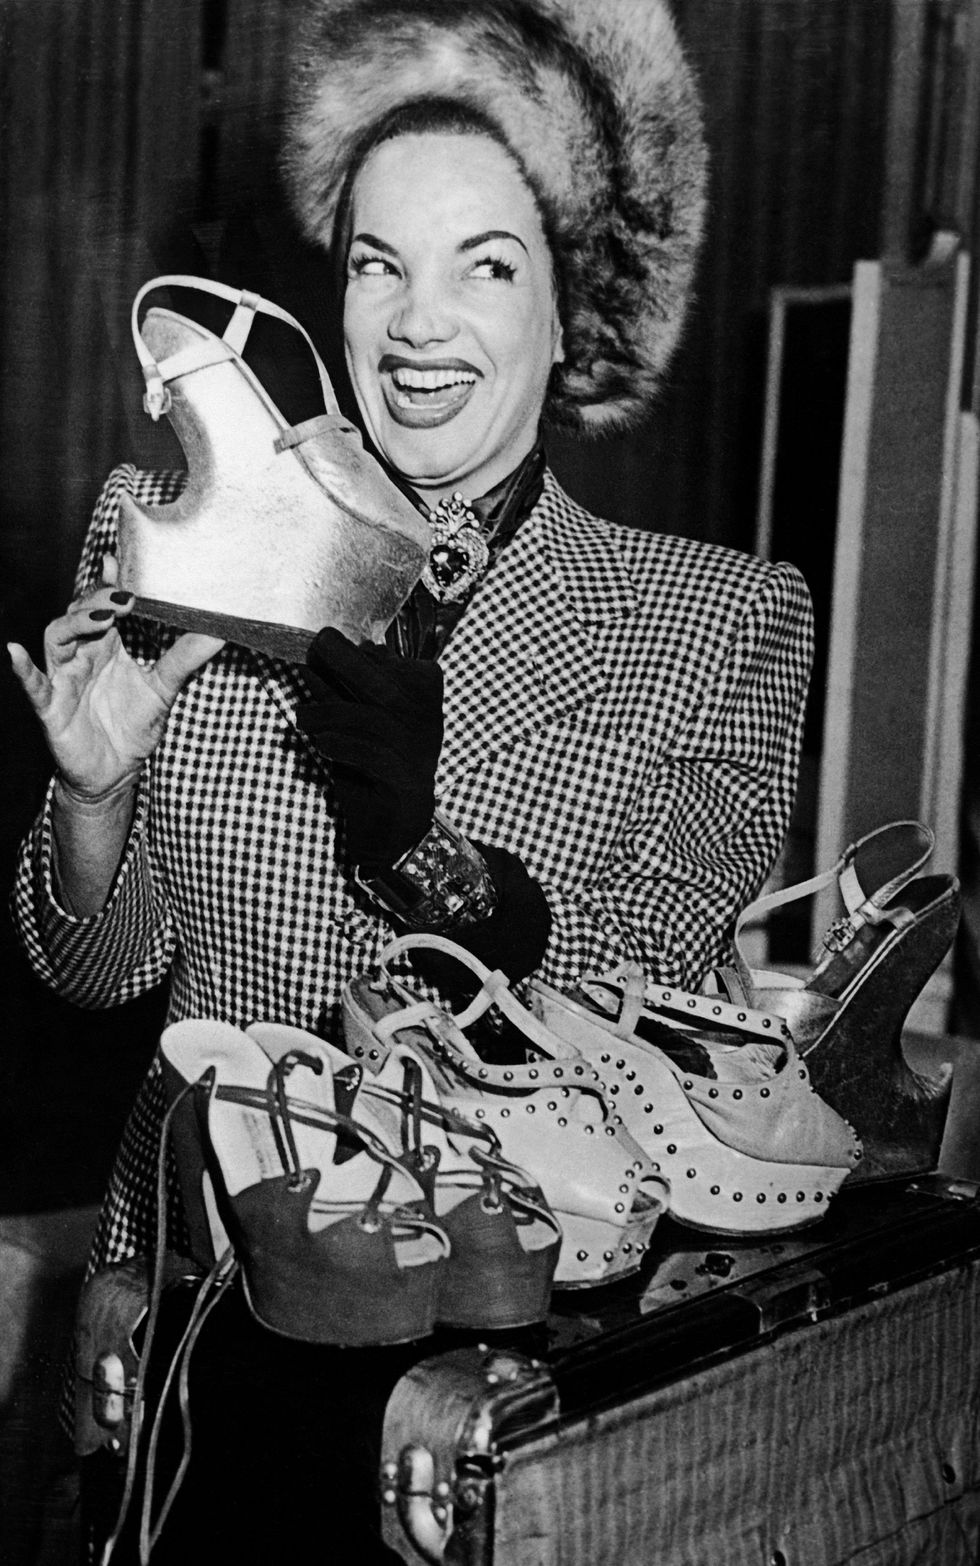 united kingdom   april 23  in london on april 23, 1948, the brazilian actress carmen miranda presents a pair of her platform shoes with a heel ranging from 8 to 12cm high, these shoes were then causing a stir in the fashion arena  photo by keystone francegamma keystone via getty images